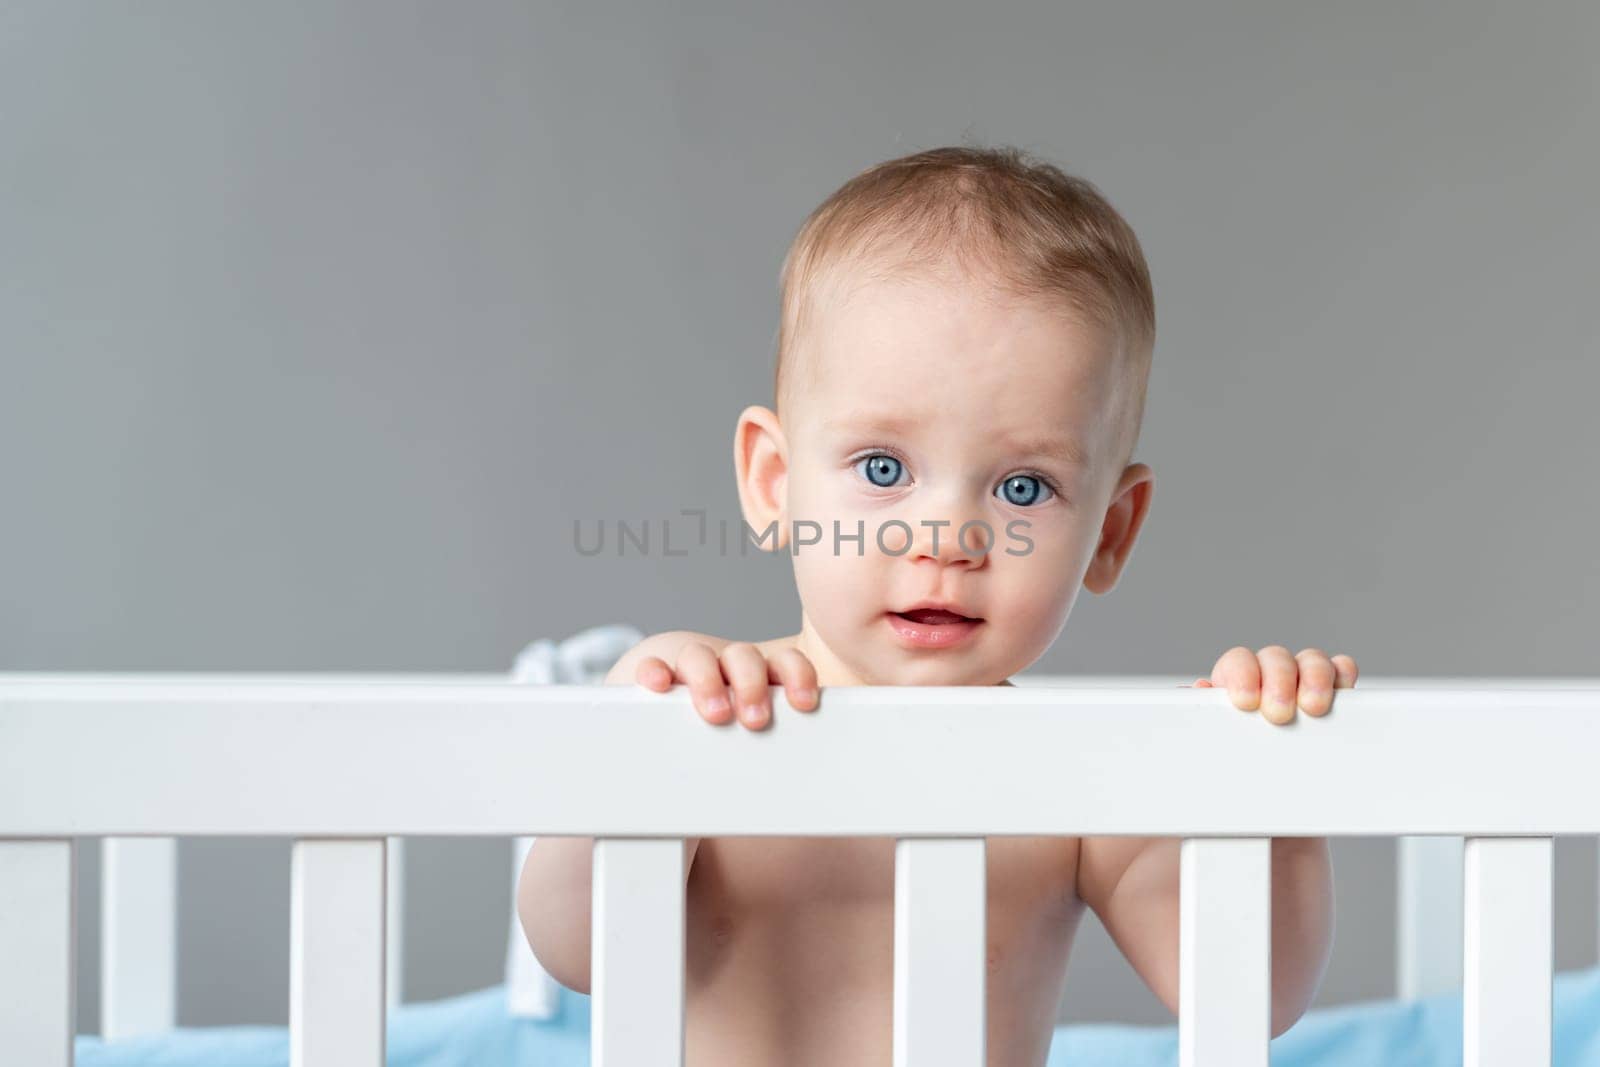 The baby is surprised and pulls himself up on the back of the crib with little effort.